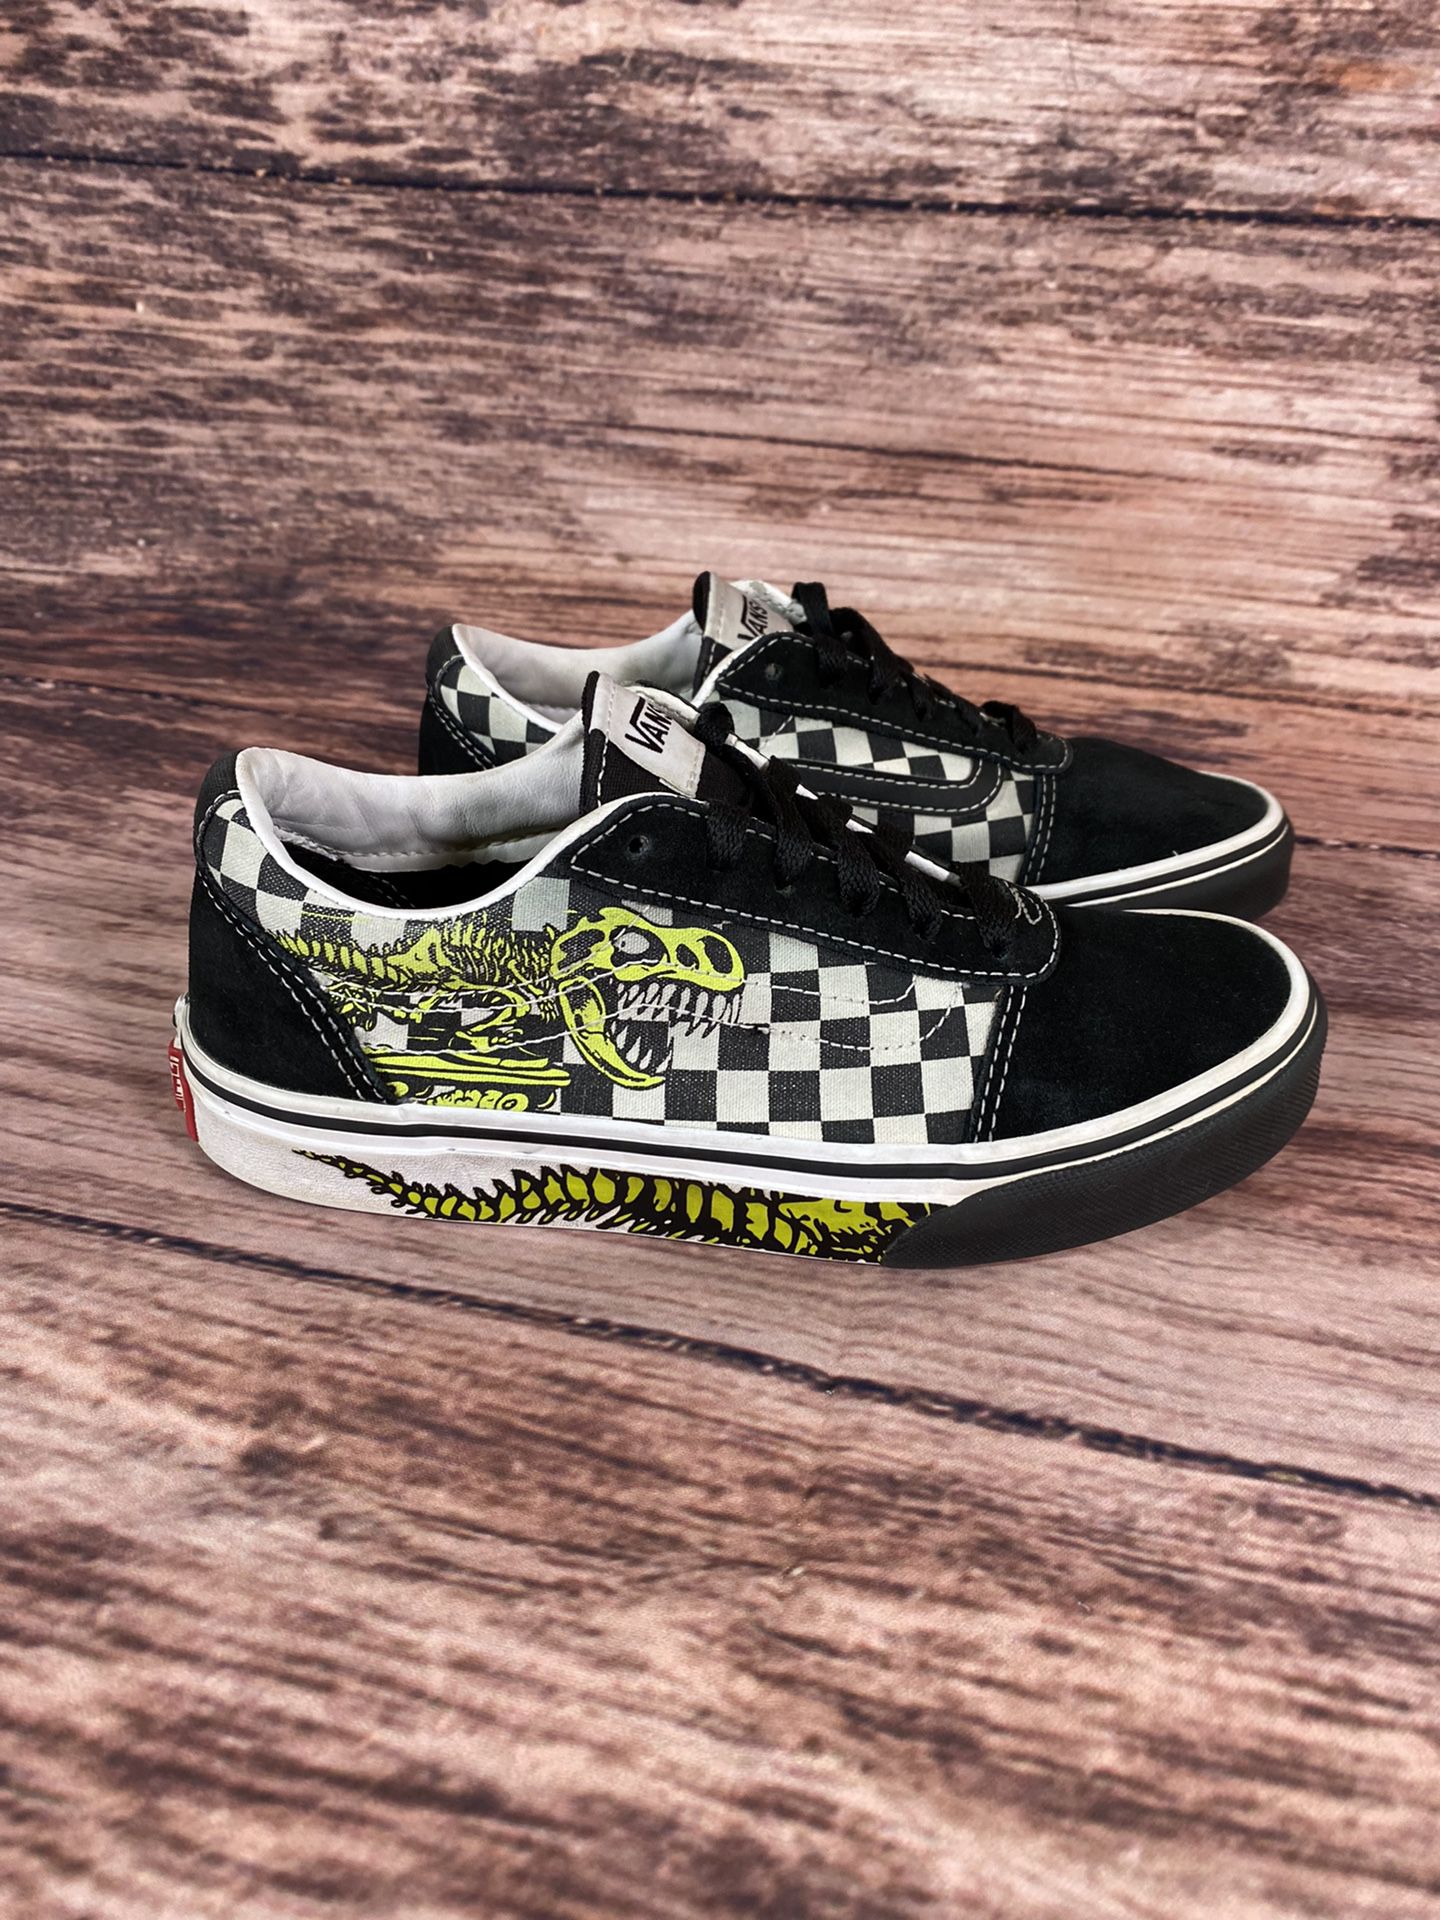 Vans Checkered Dino Size 4Y